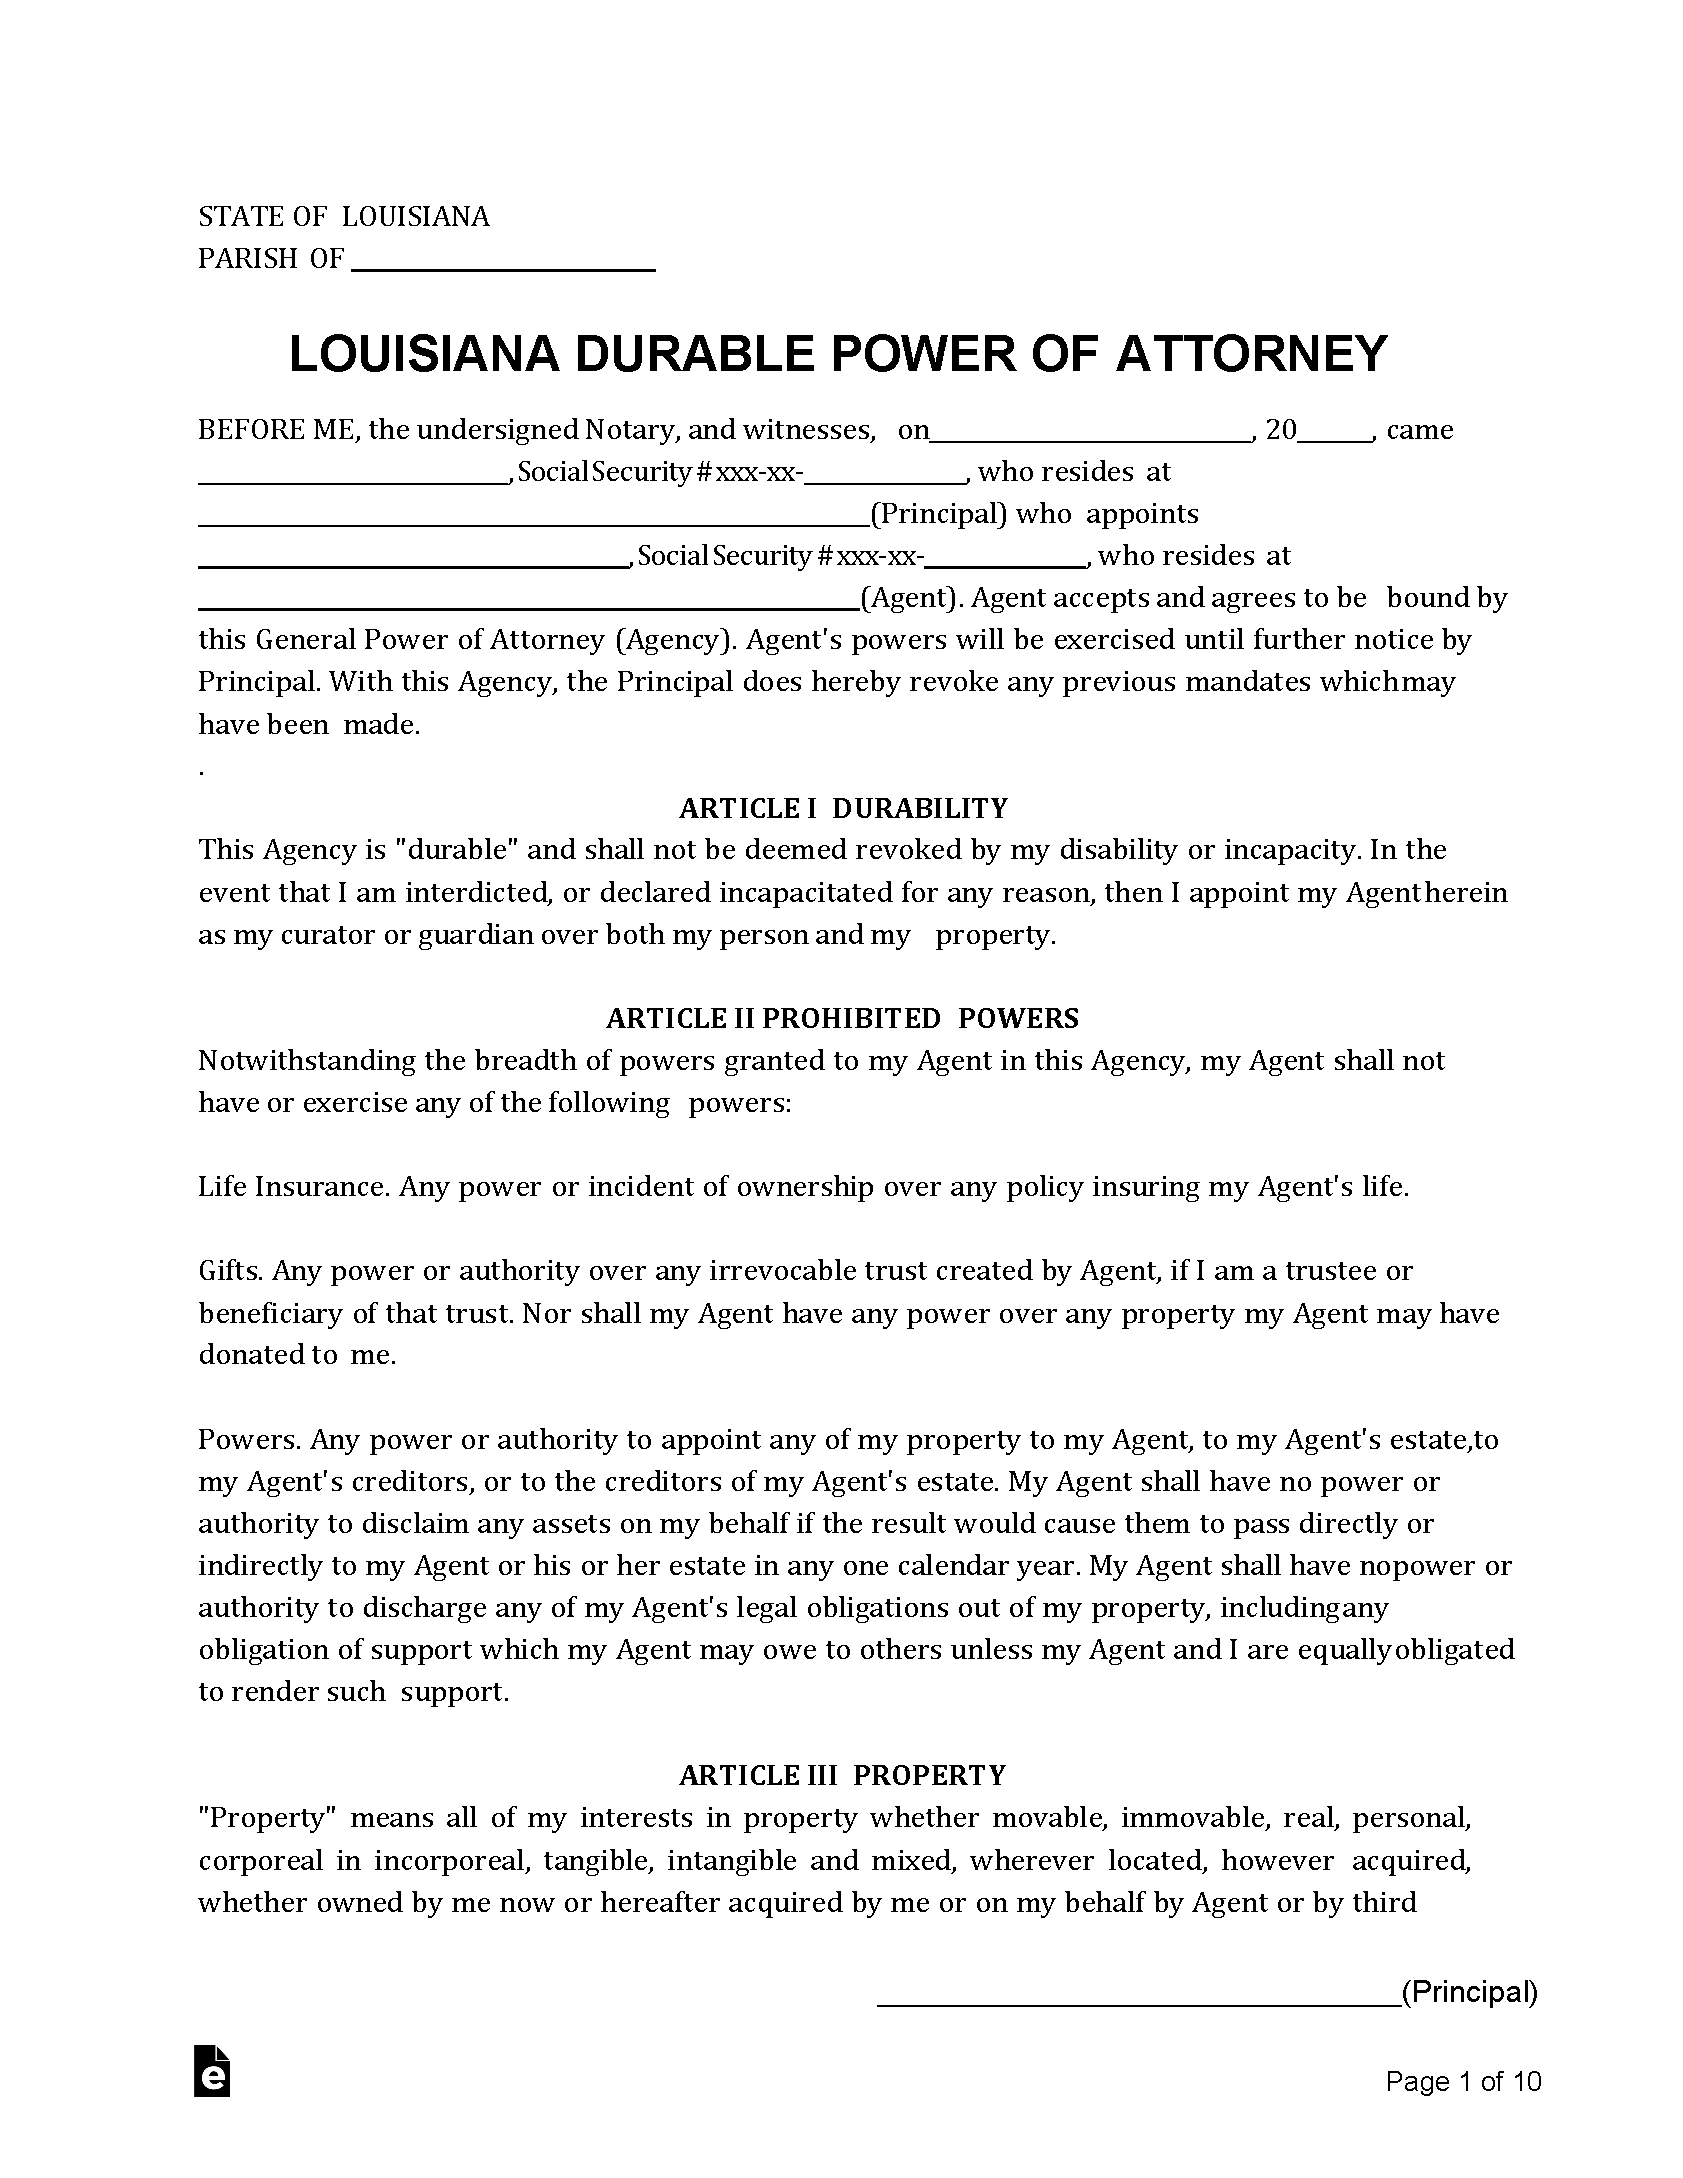 Free Printable Durable Power Of Attorney Form For Louisiana - Printable ...